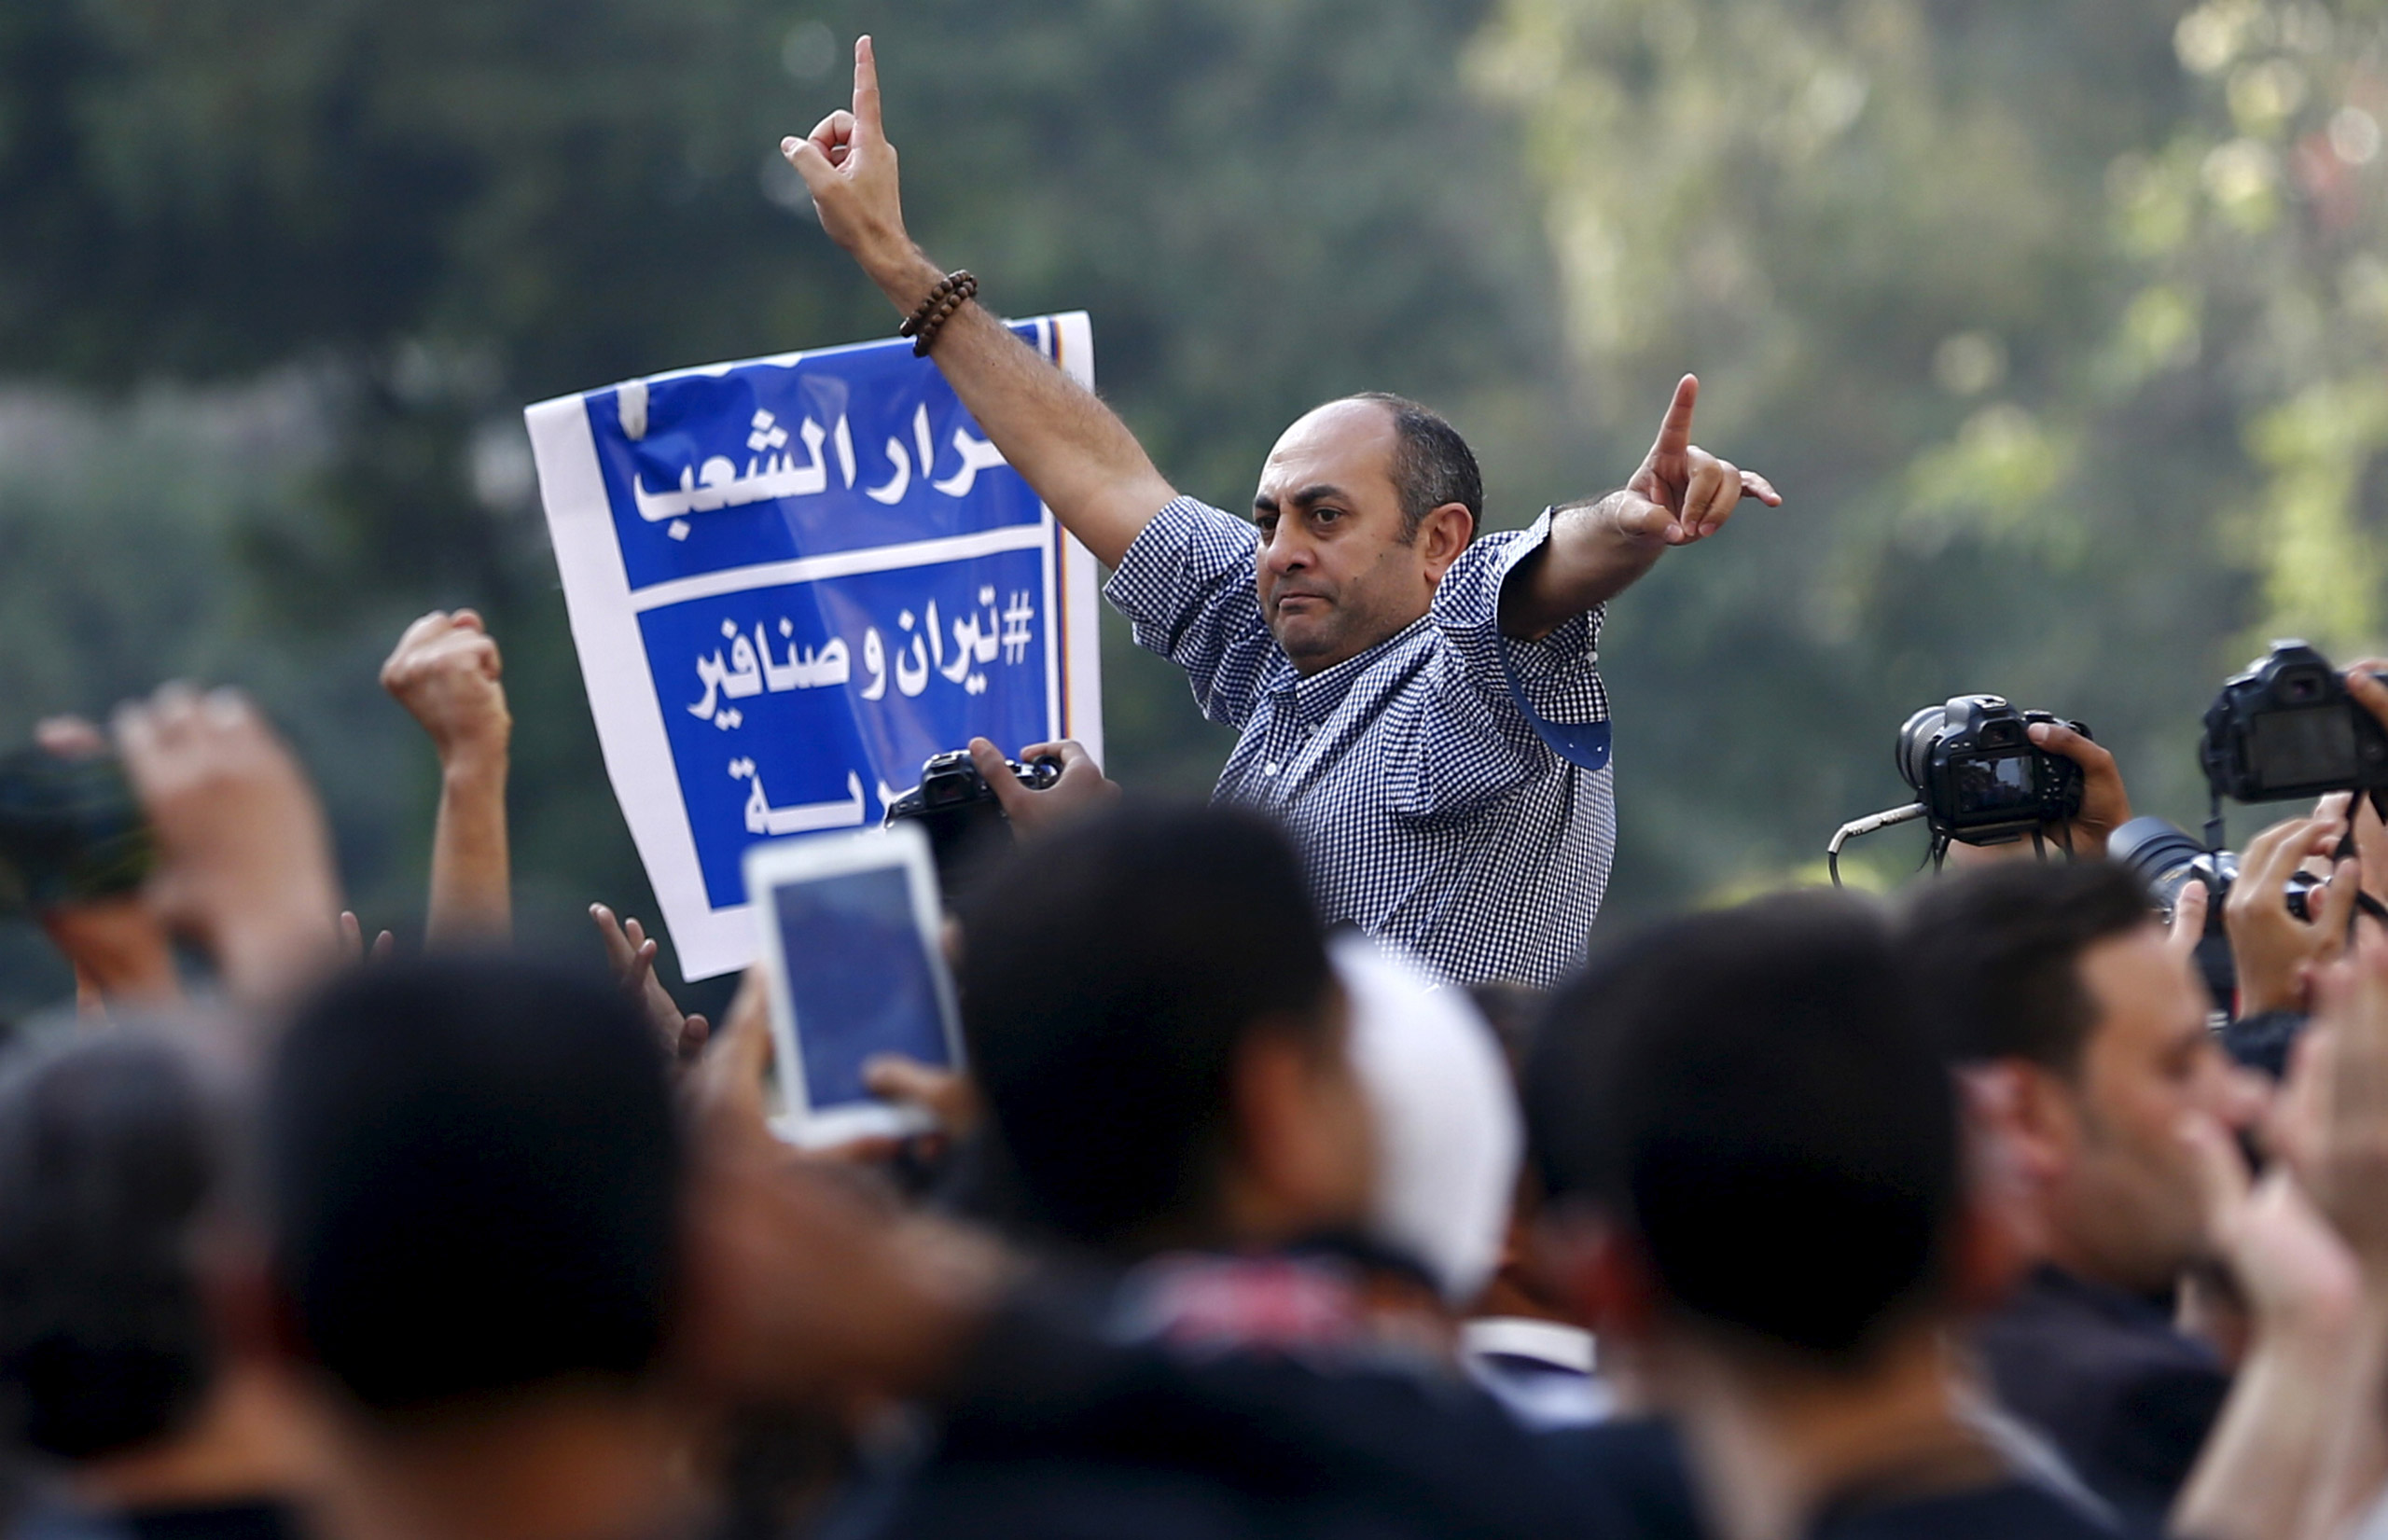 A former presidential candidate and lawyer Khaled Ali shouts slogans against President Abdel Fattah al-Sisi and the government during a demonstration protesting the government's decision to transfer two Red Sea islands to Saudi Arabia, in front of the Press Syndicate in Cairo, Egypt, April 15, 2016. REUTERS/Amr Abdallah Dalsh - RTX2A5L3